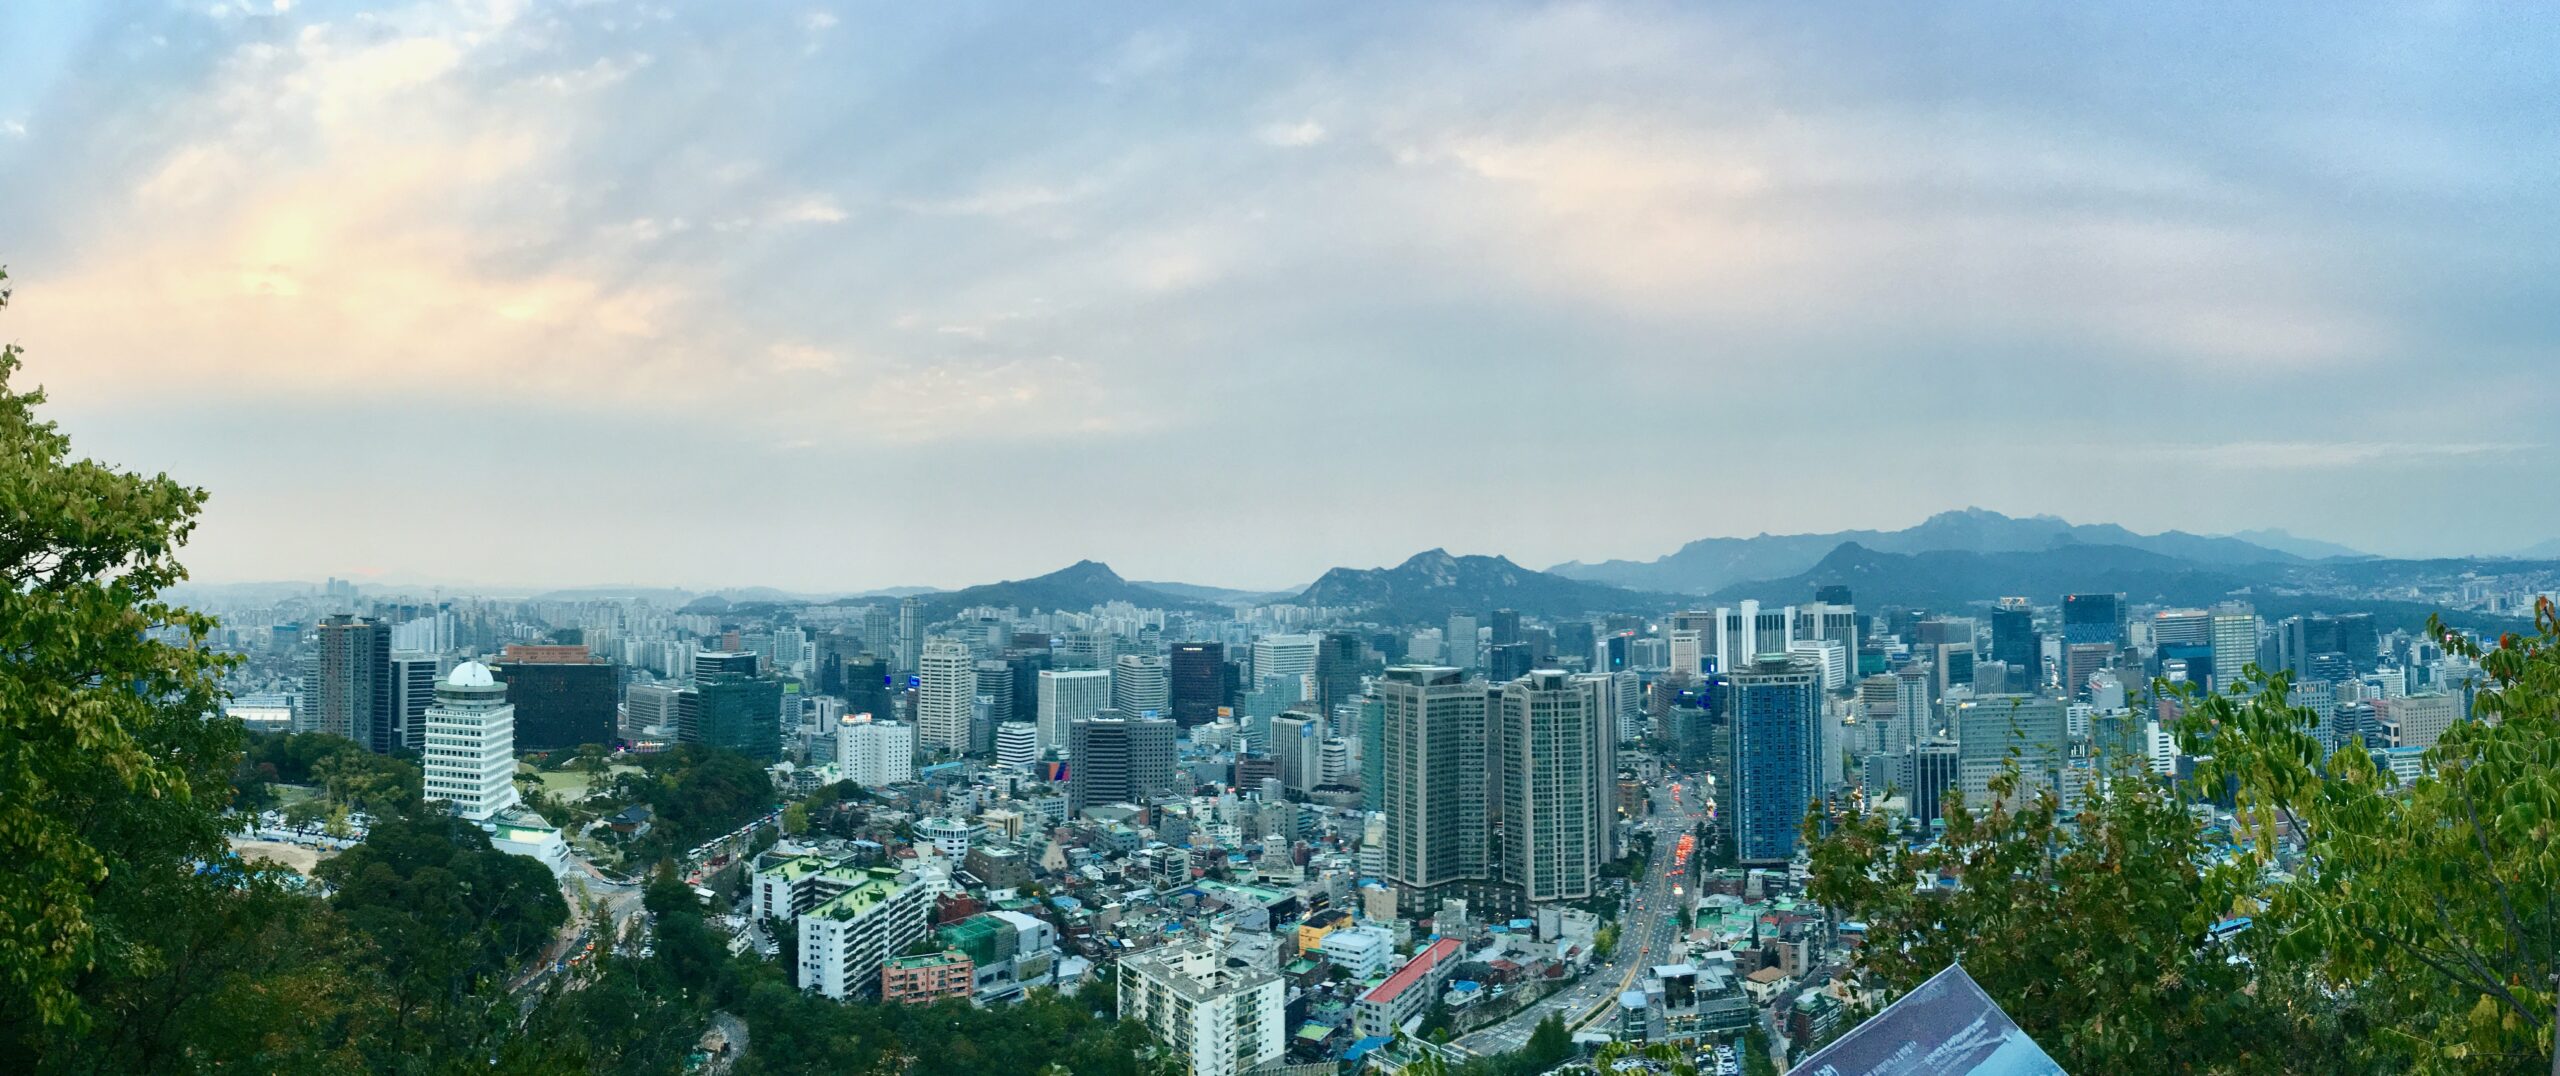 48 Hours in Seoul – From Hong Kong to Korea